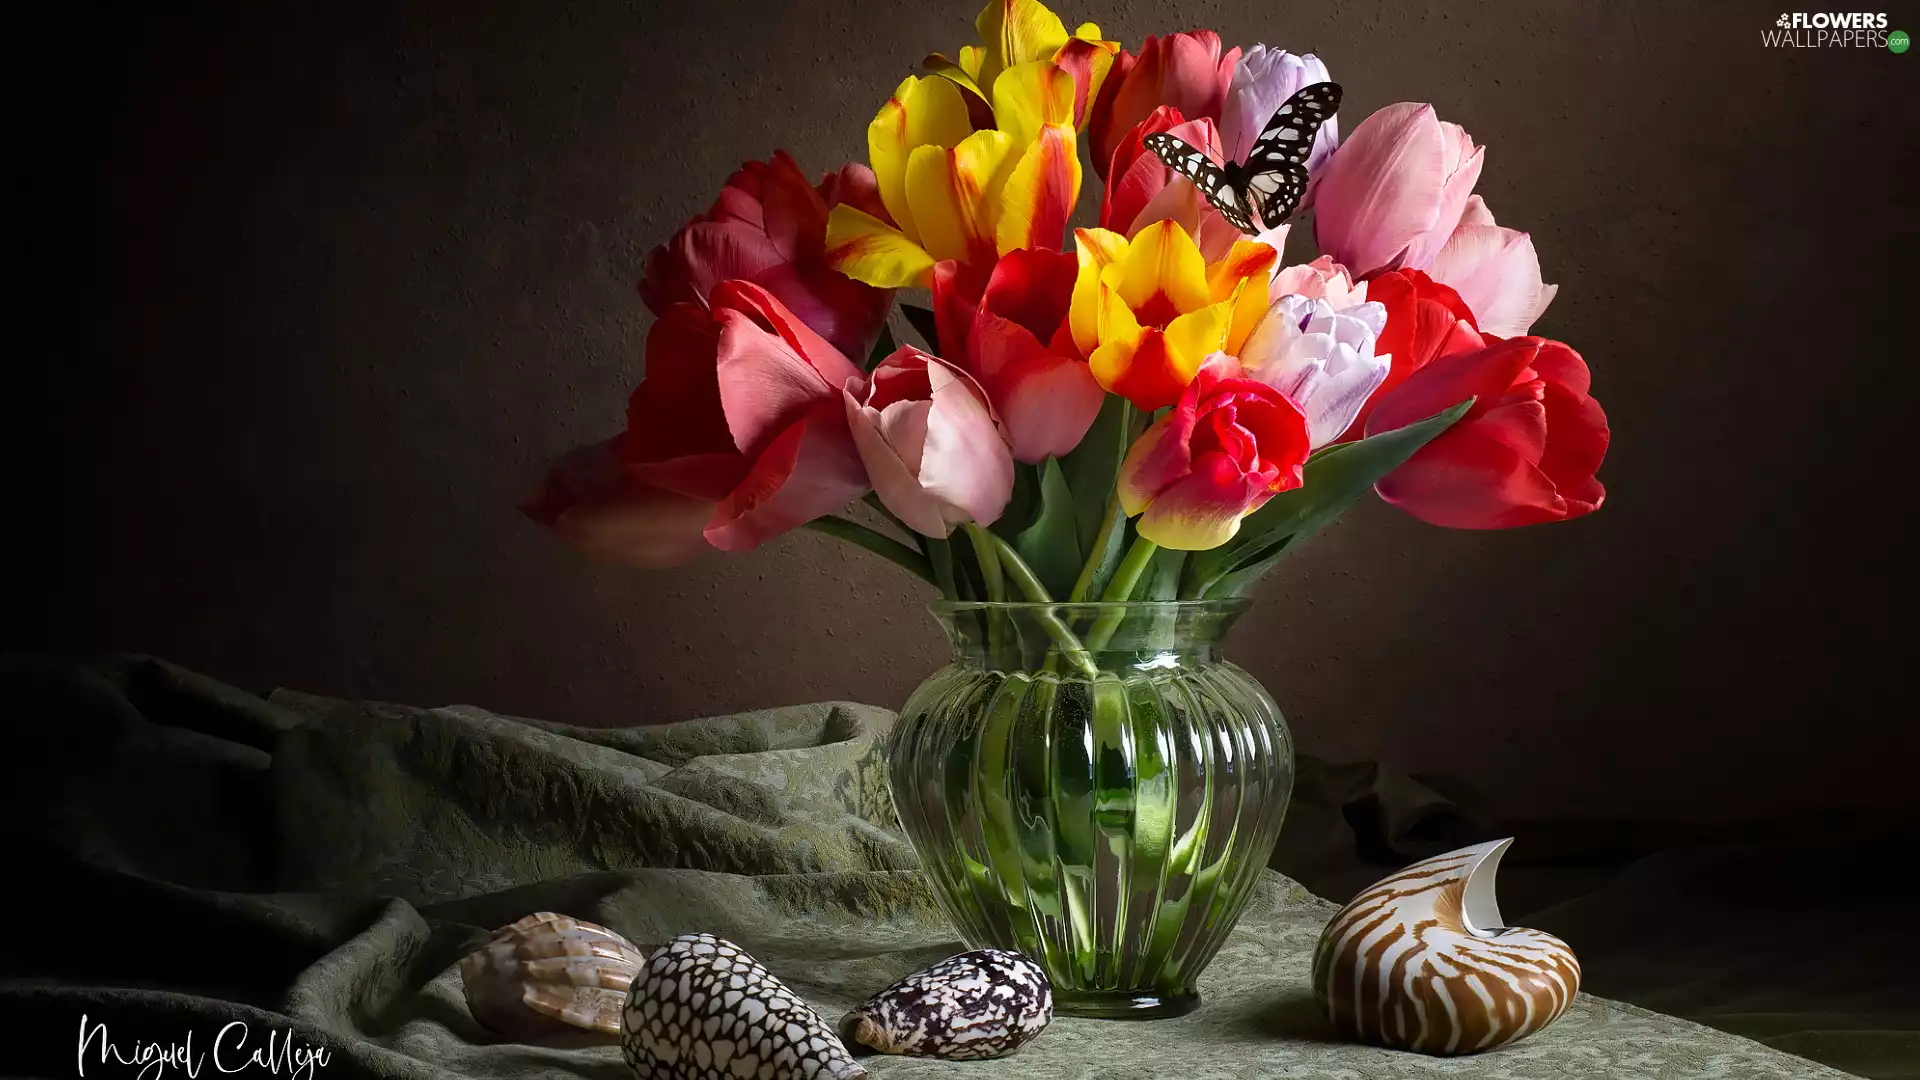 Vase, Tulips, Shells, glass, color, butterfly, composition